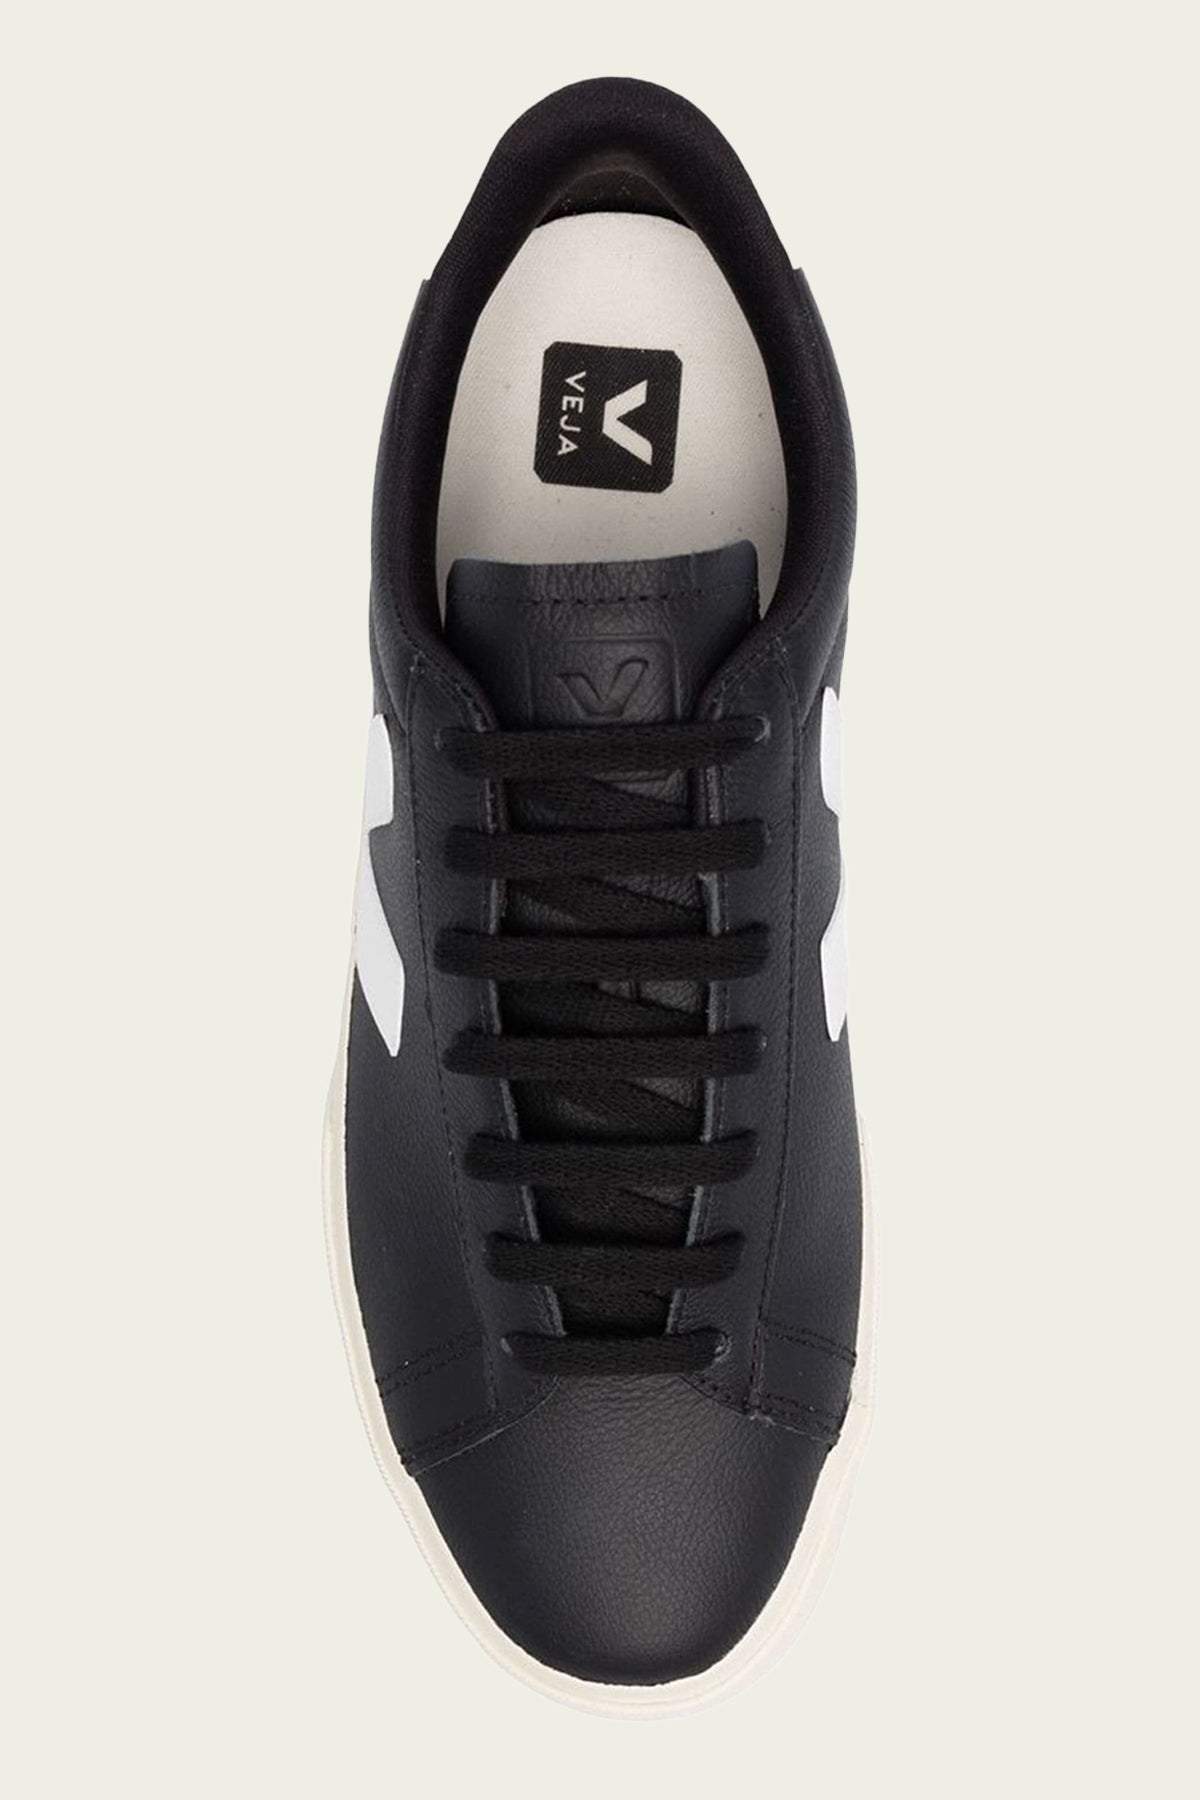 Campo Chromefree Leather Men Sneaker in Black and White - shop-olivia.com